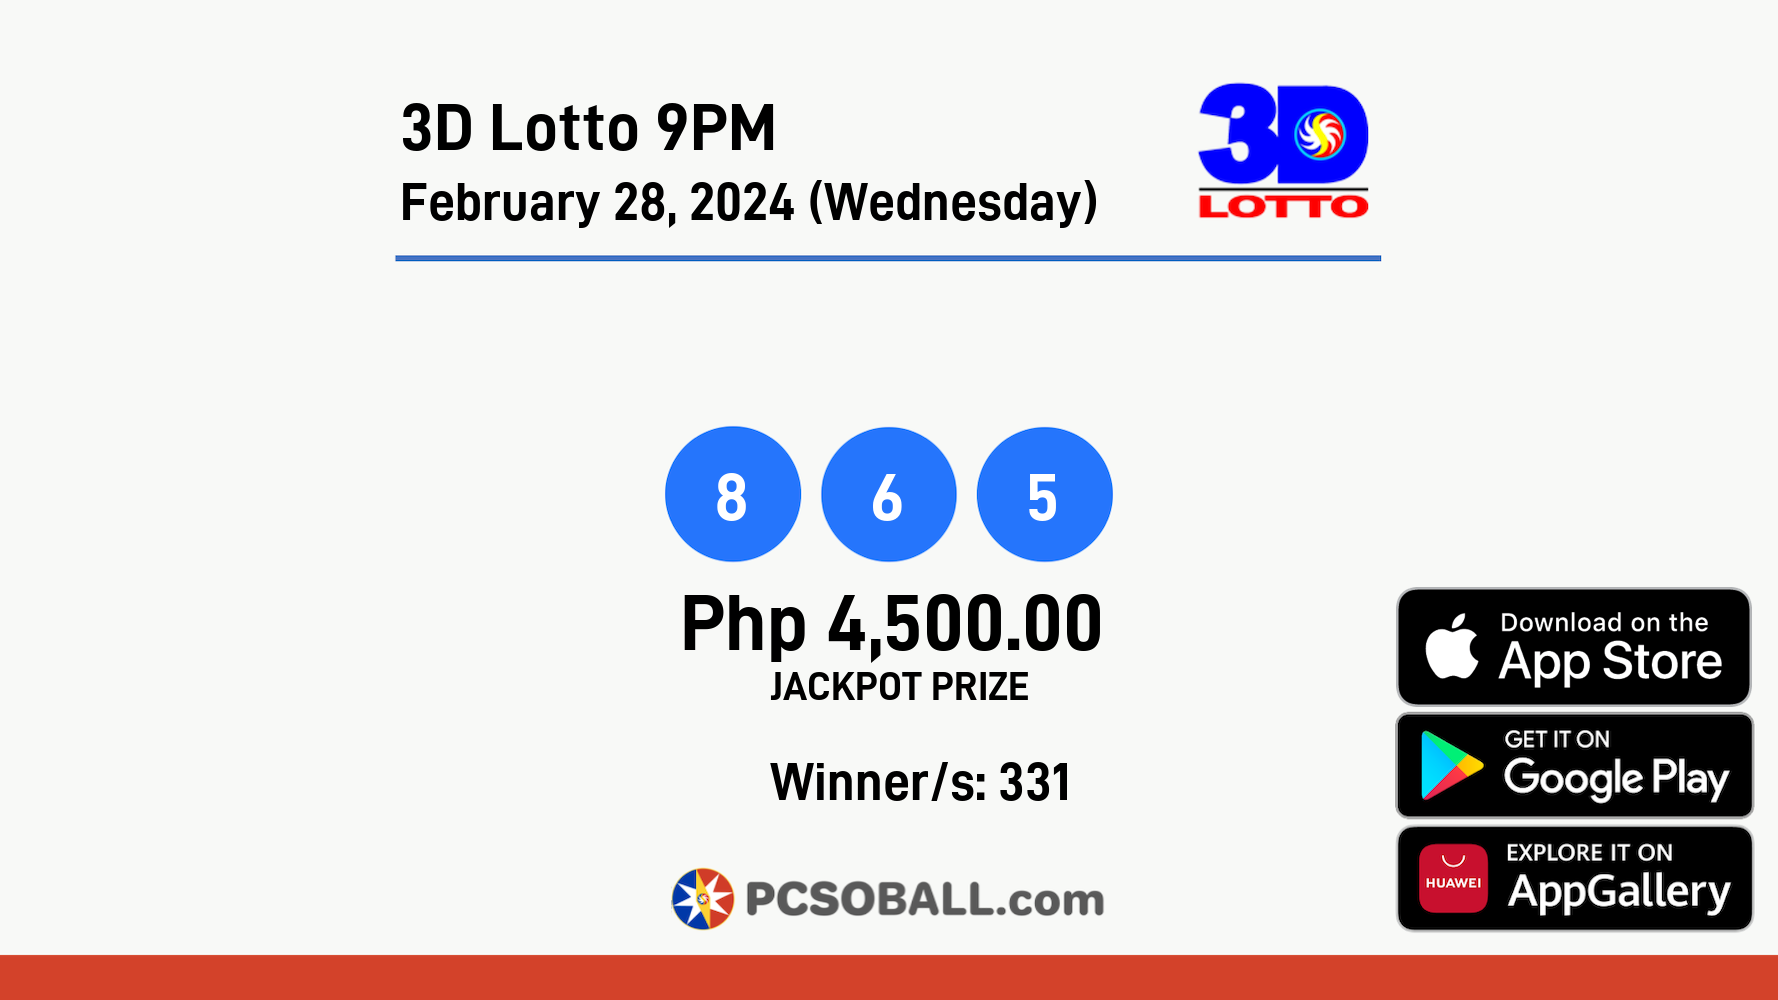 3D Lotto 9PM February 28, 2024 (Wednesday) Result